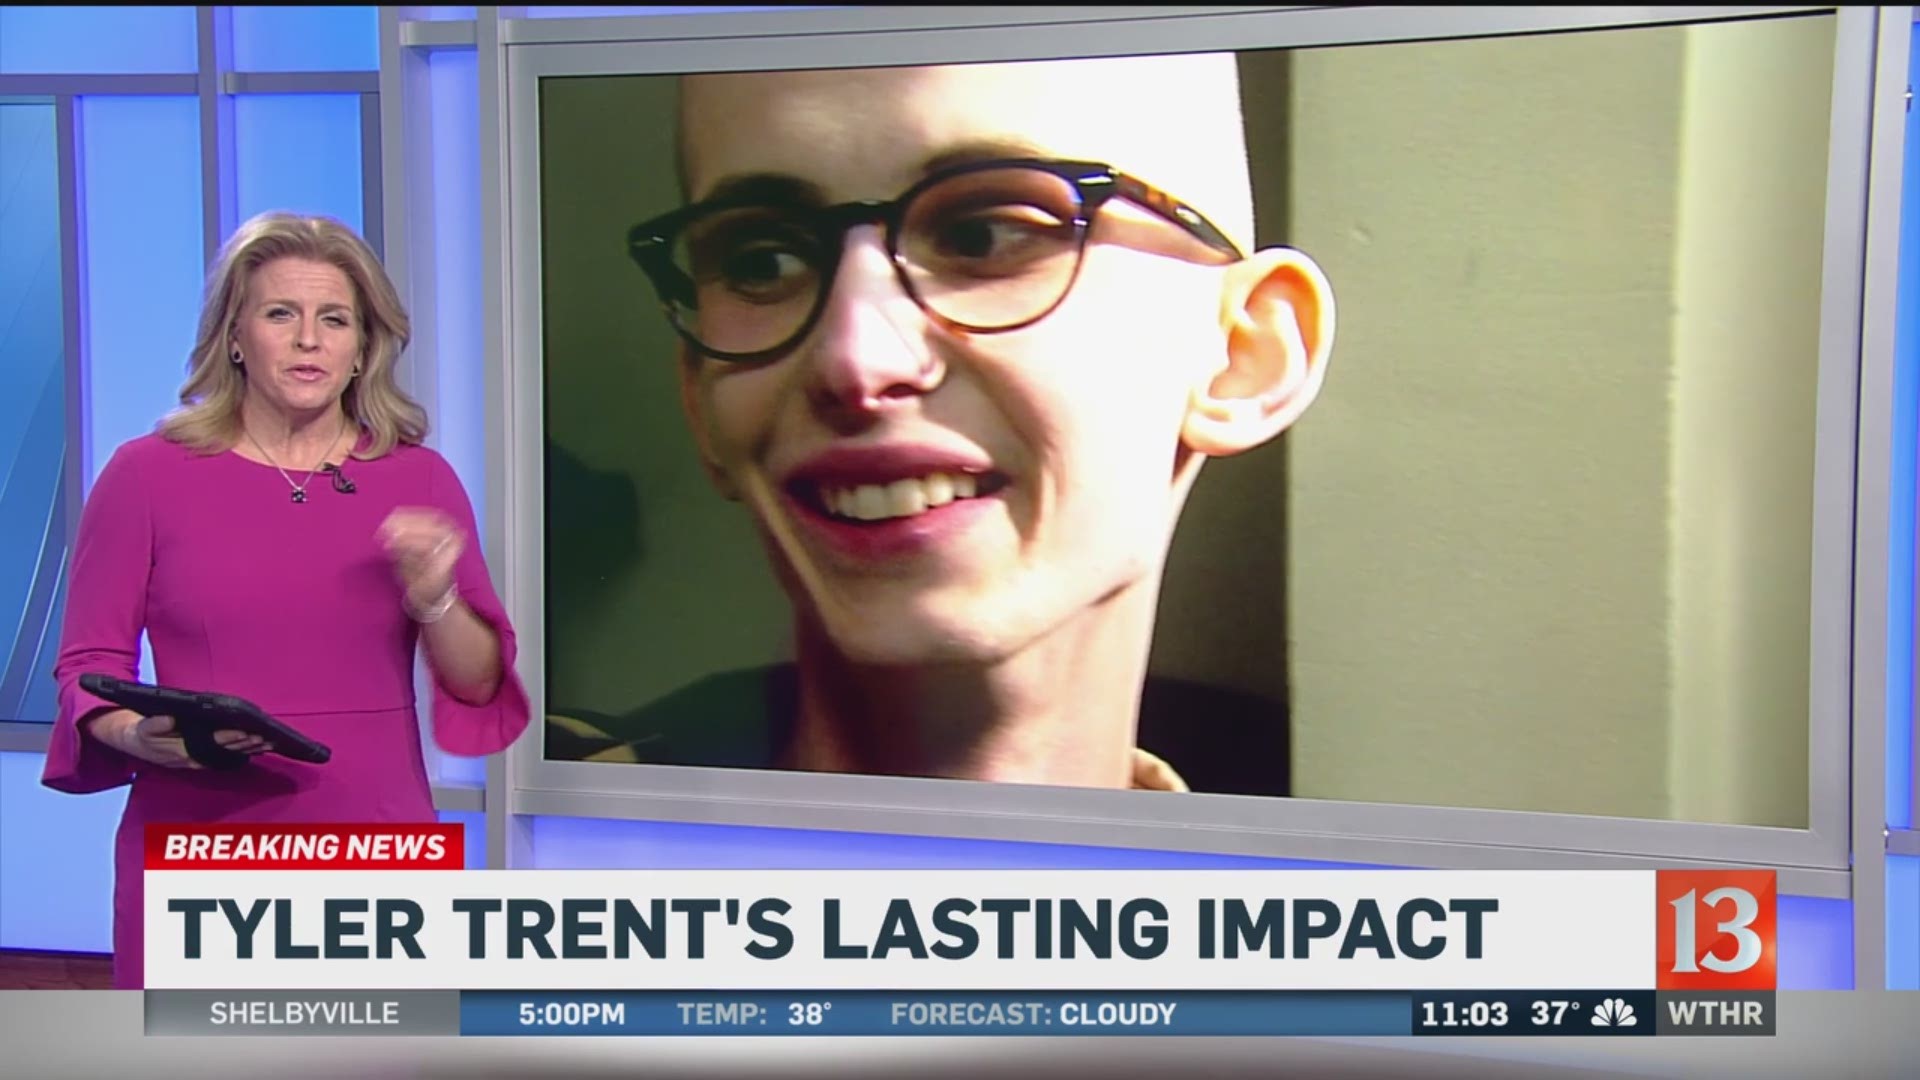 Tyler Trent's cancer research legacy